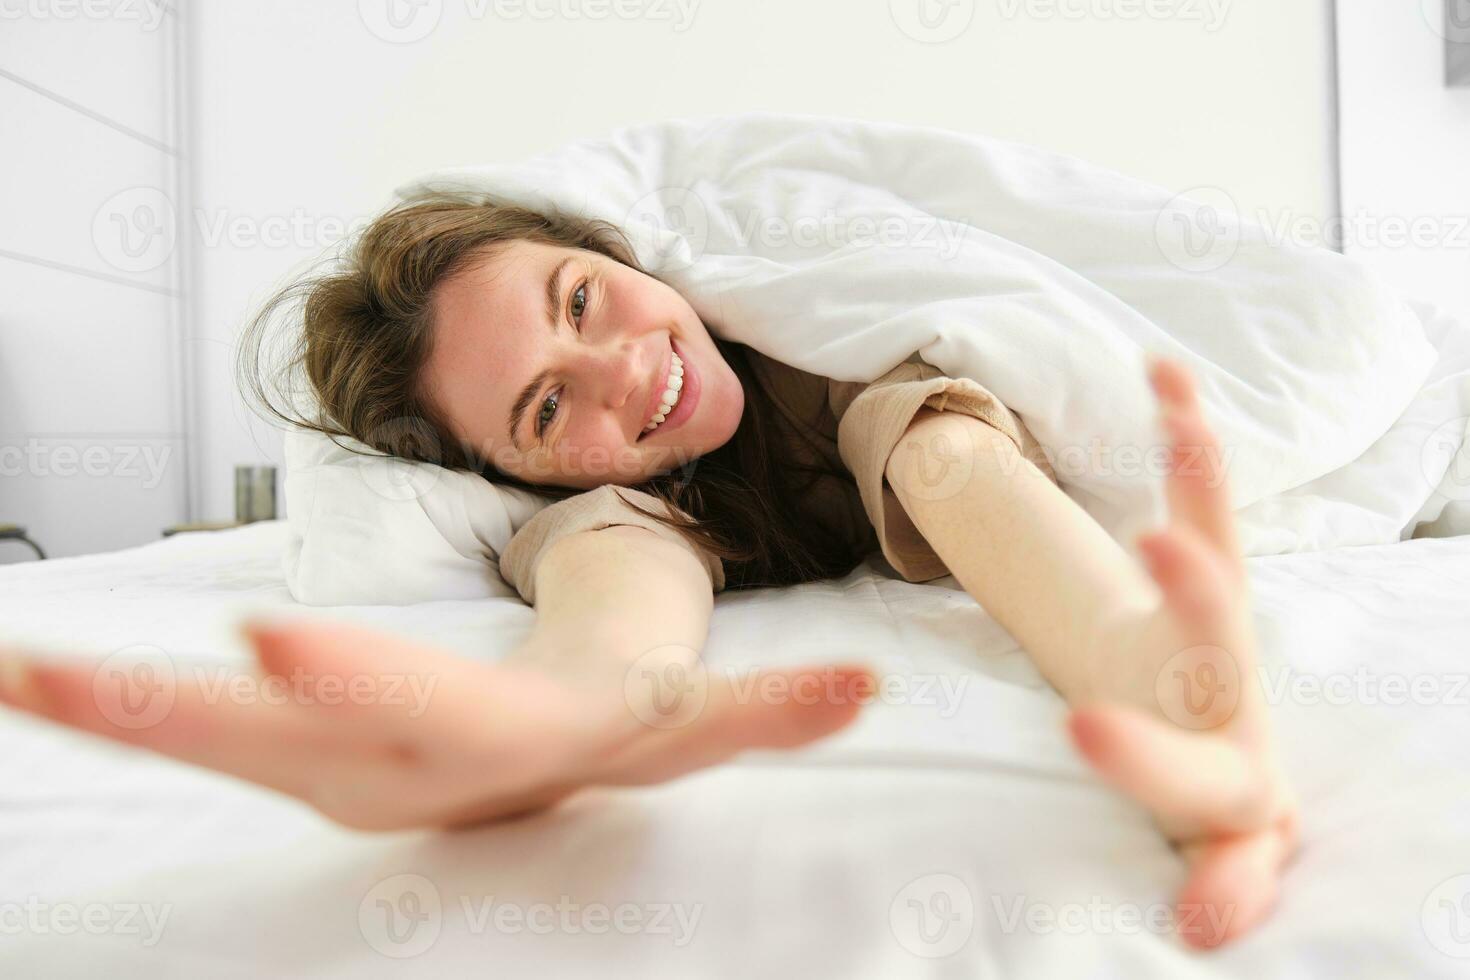 Cheerful girl stretching her arms in bed, waking up from good sleep or nap, enjoying the morning photo